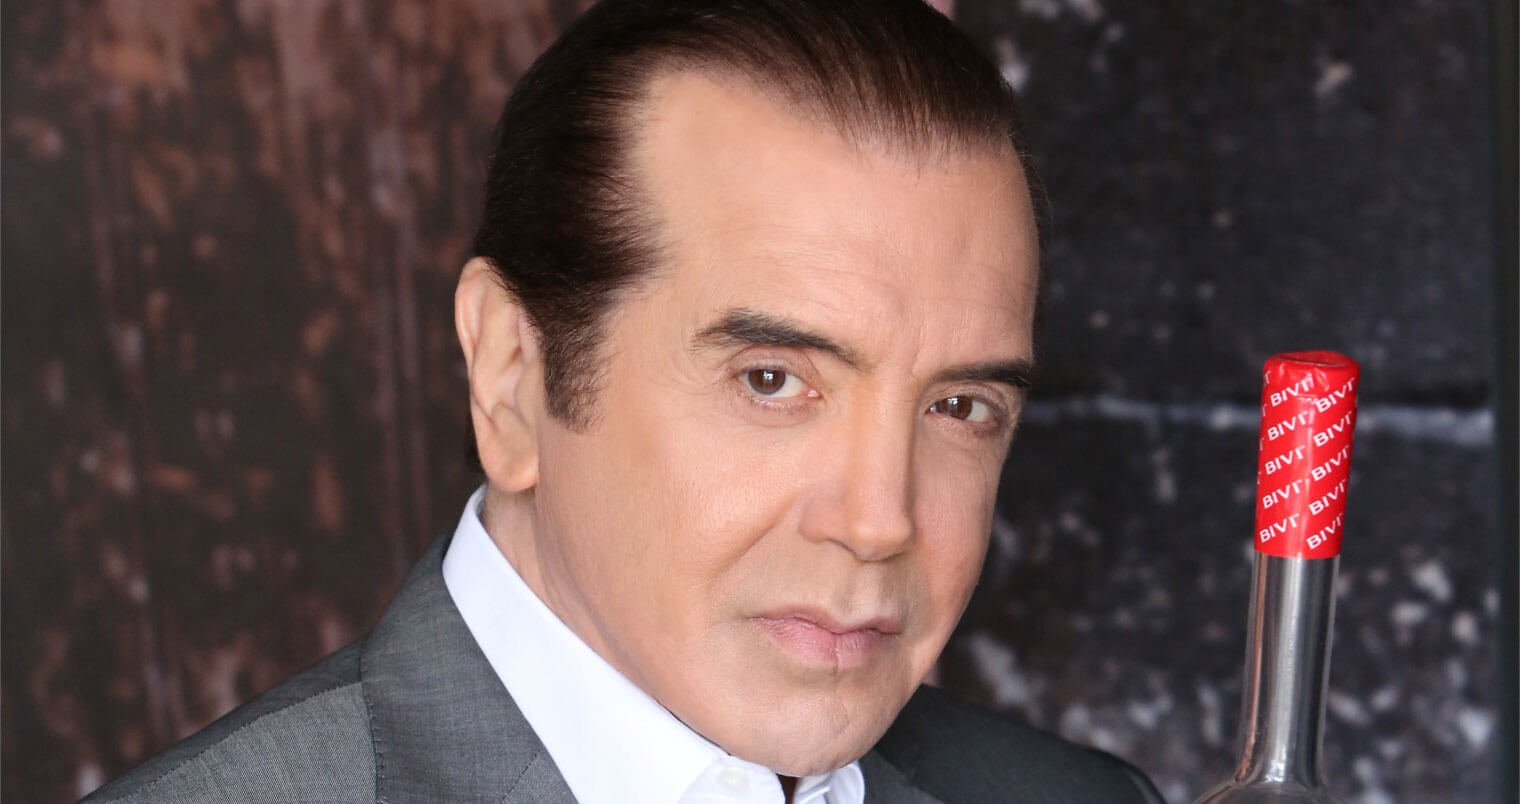 Chazz Palminteri to Open the Nightclub & Bar Show Expo Hall with Official Ribbon Cutting, featured image, celebrity news